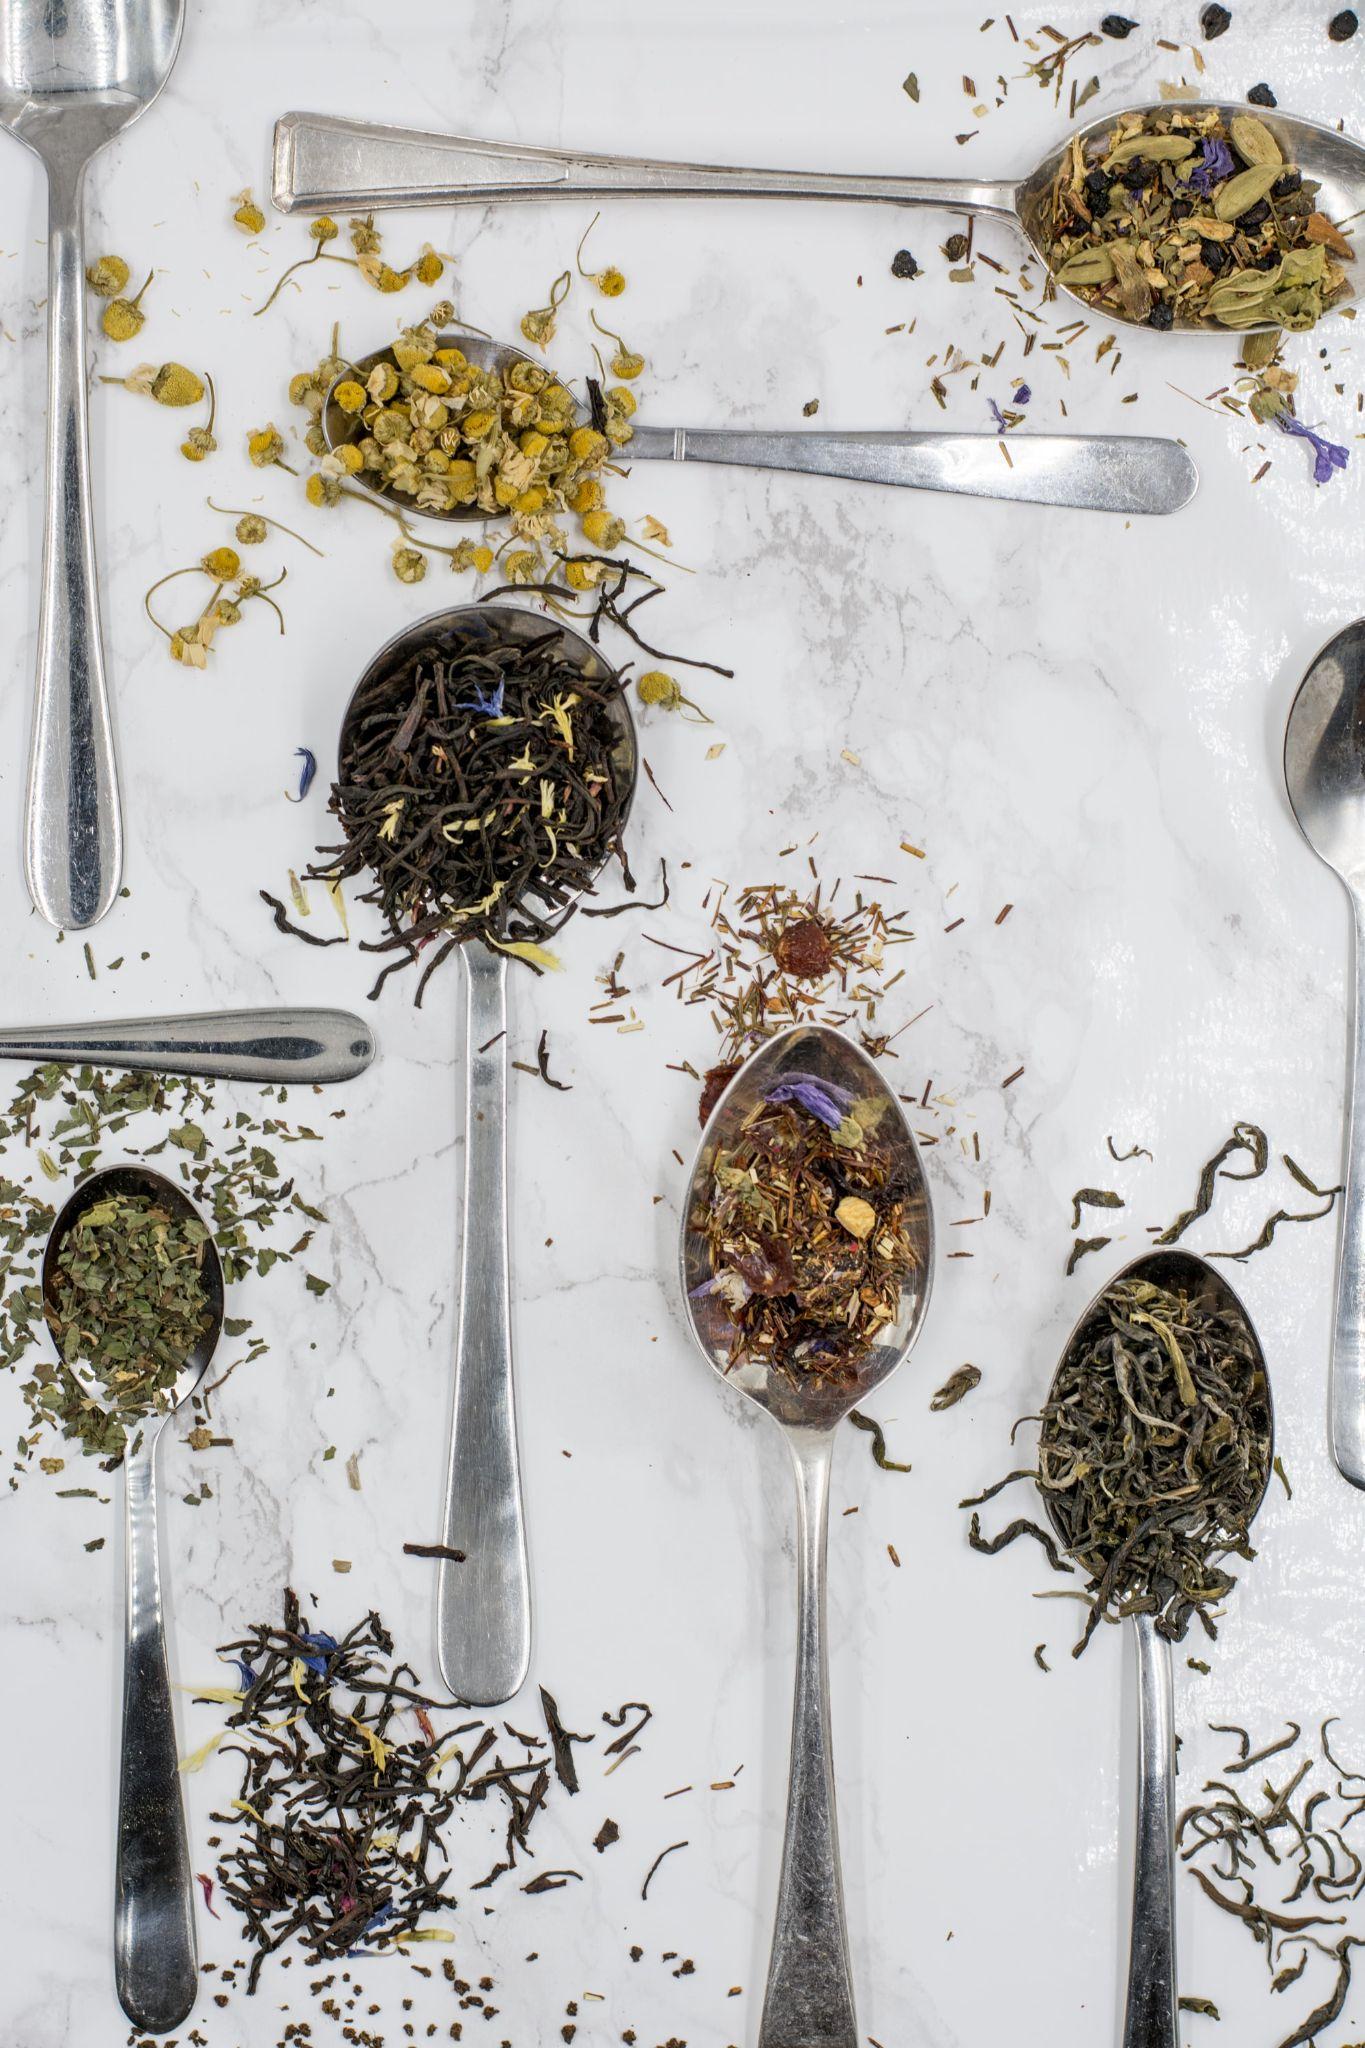 Different Types Of Oolong Tea